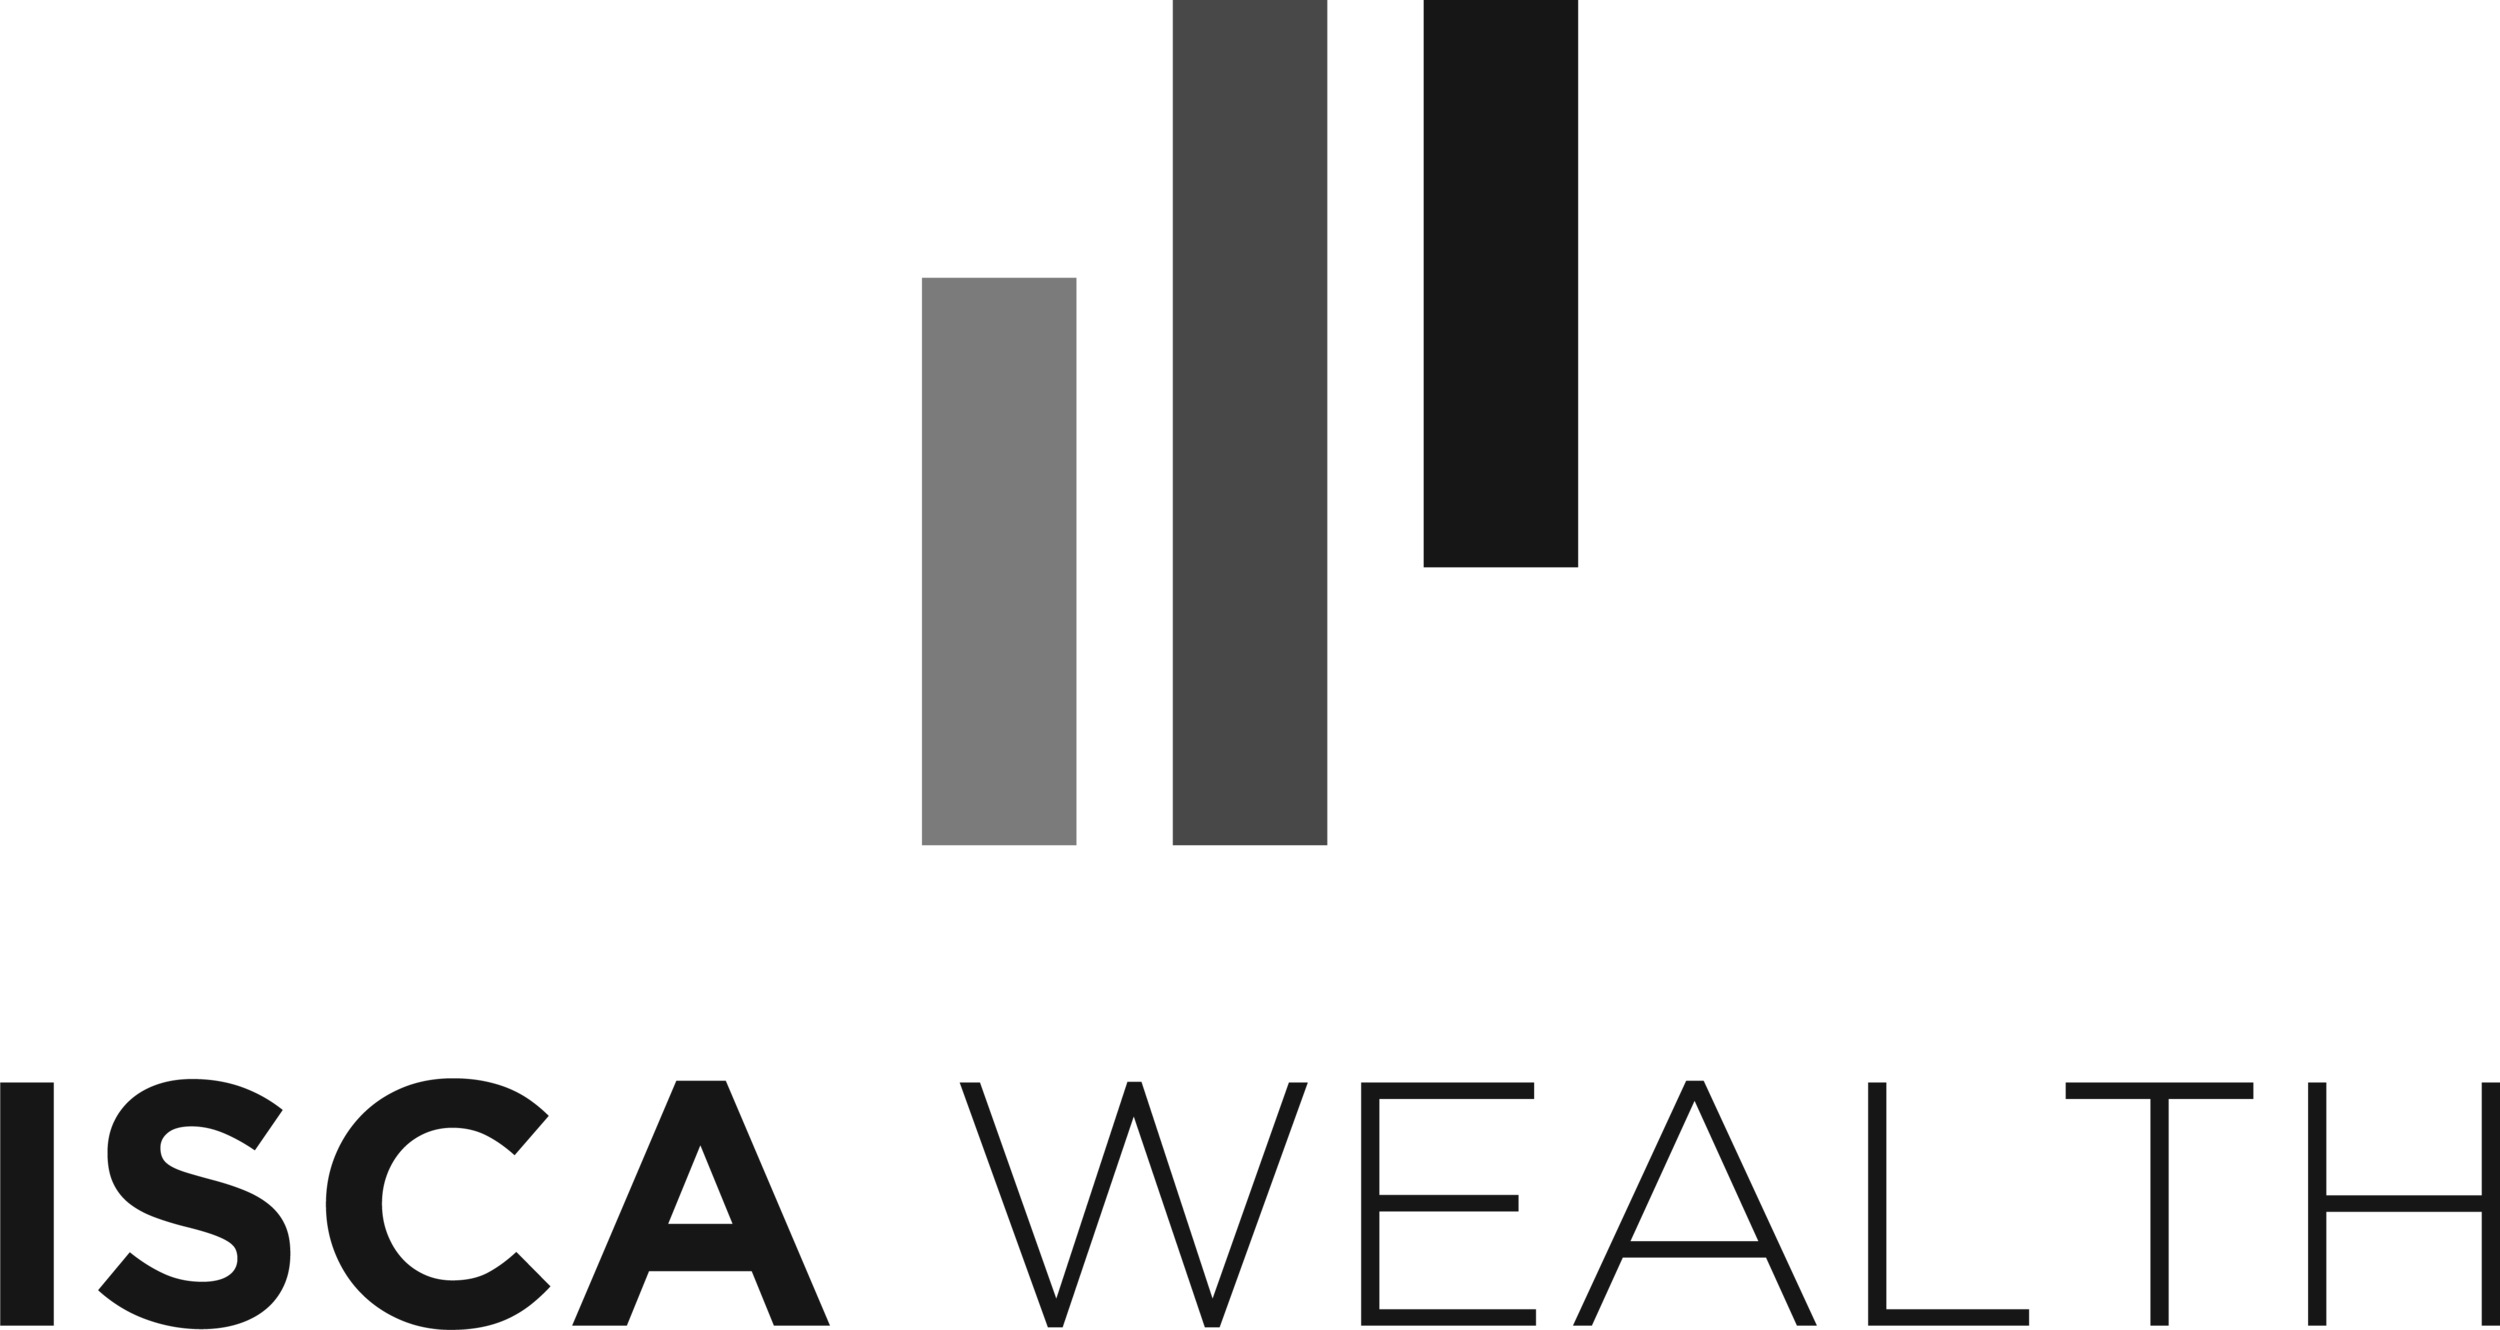 Isca Wealth 